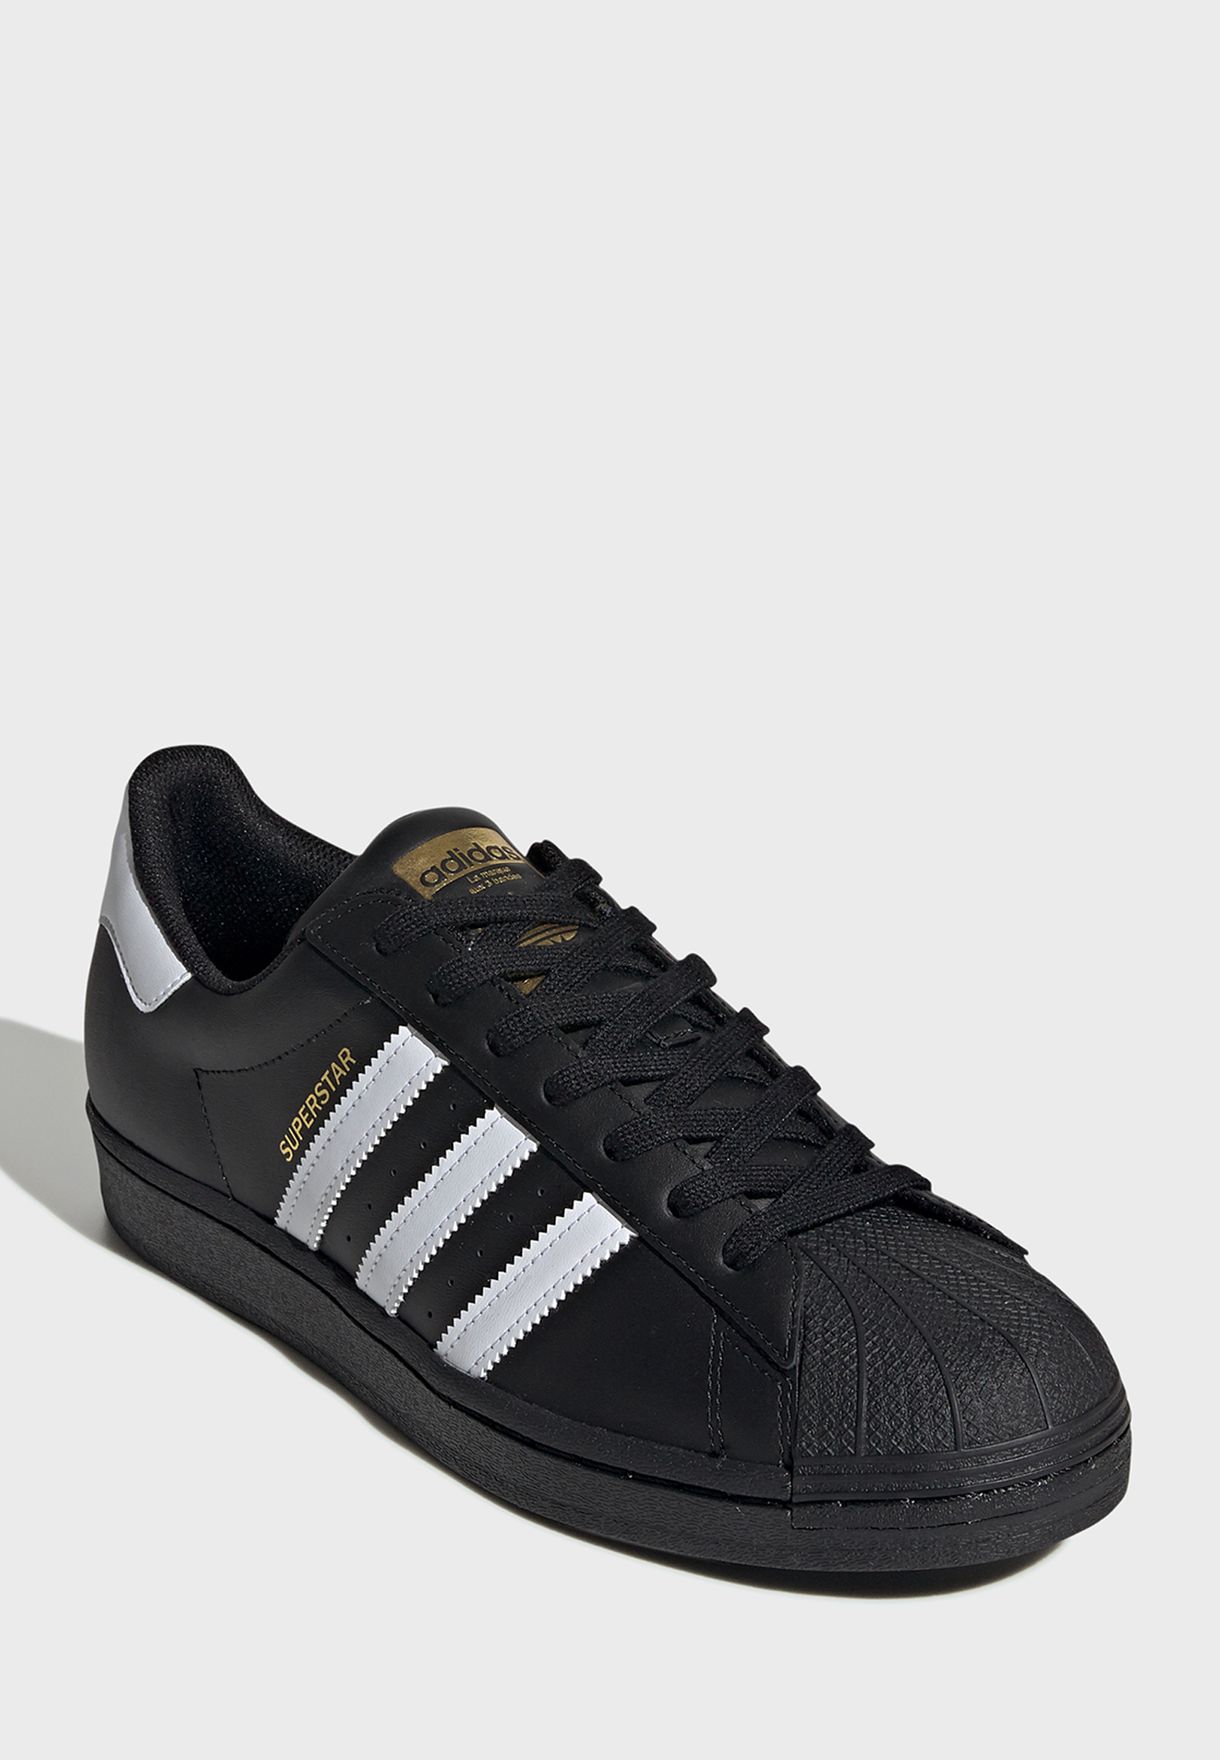 Superstar Casual Mens Sneakers Shoes